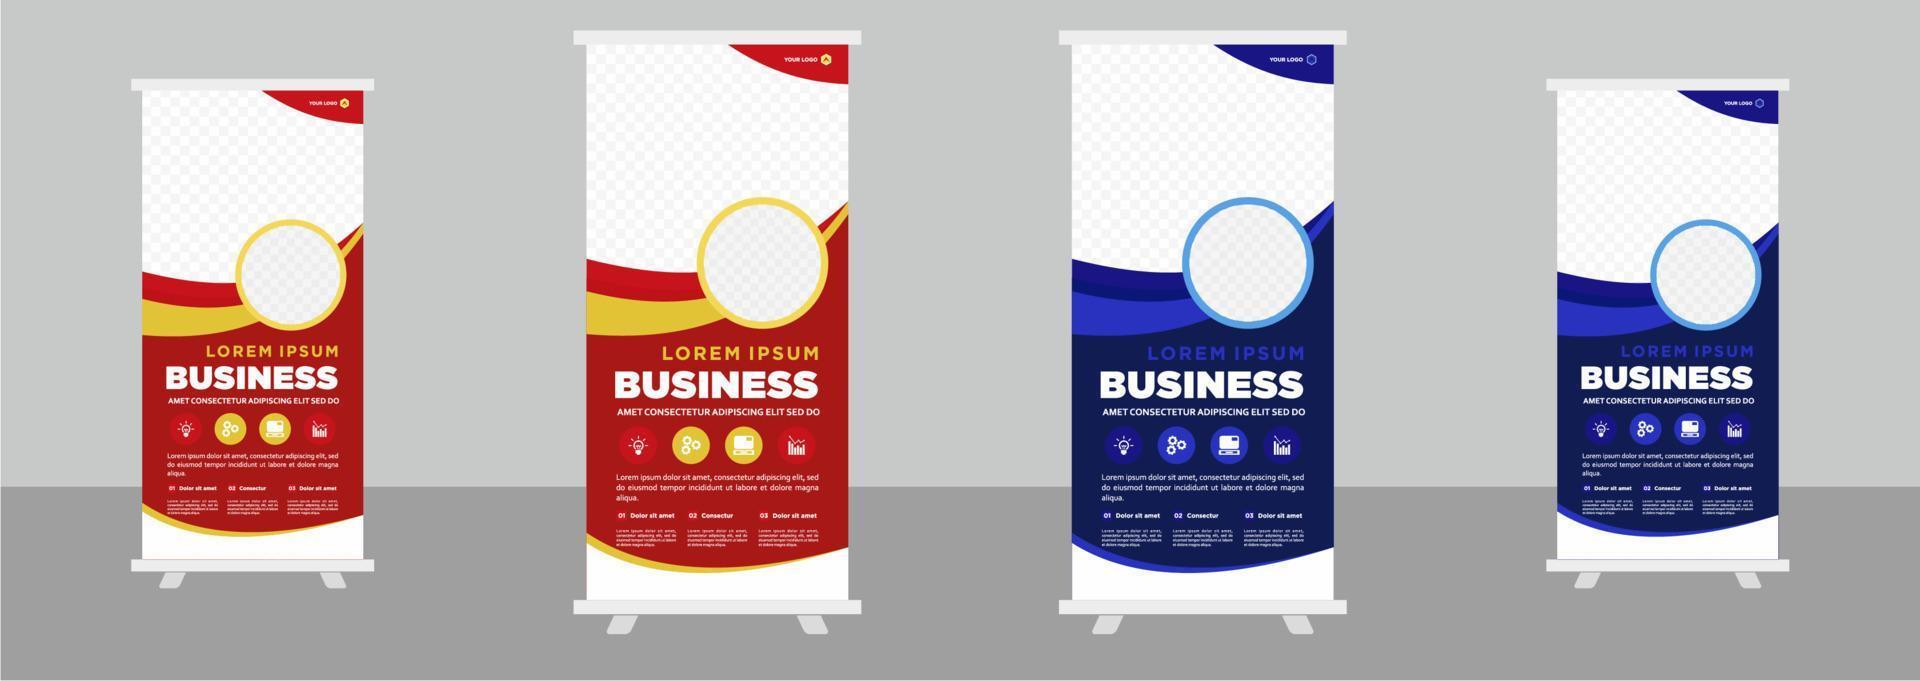 Corporate business roll up stand banner design template vector